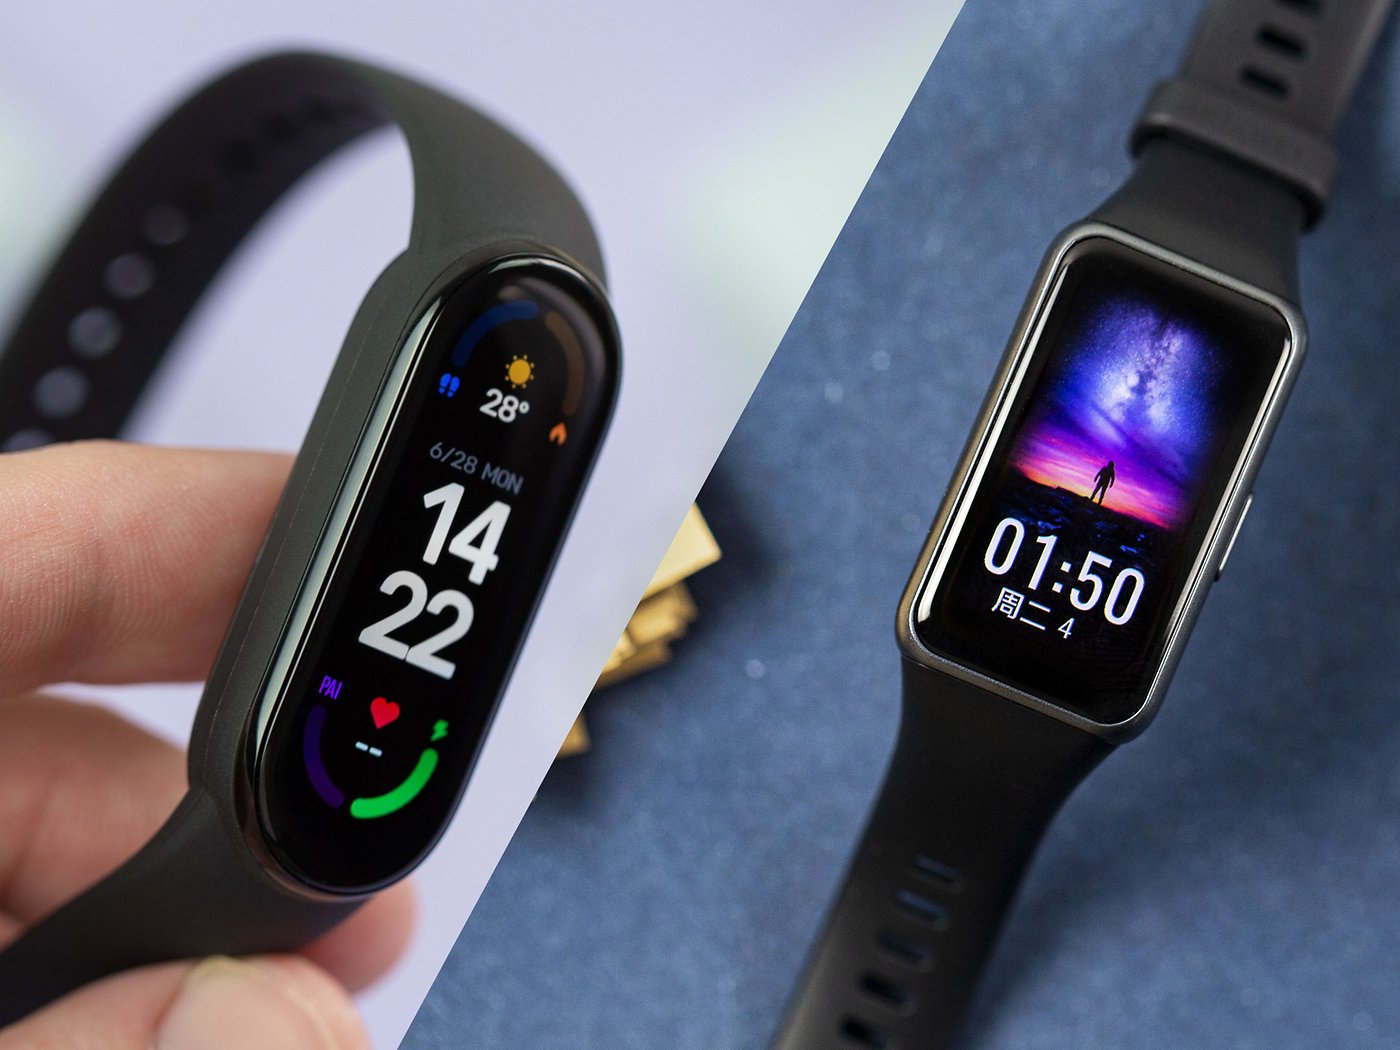 Huawei Band 6] vs. Watch Fit How do they compare? - HUAWEI Community